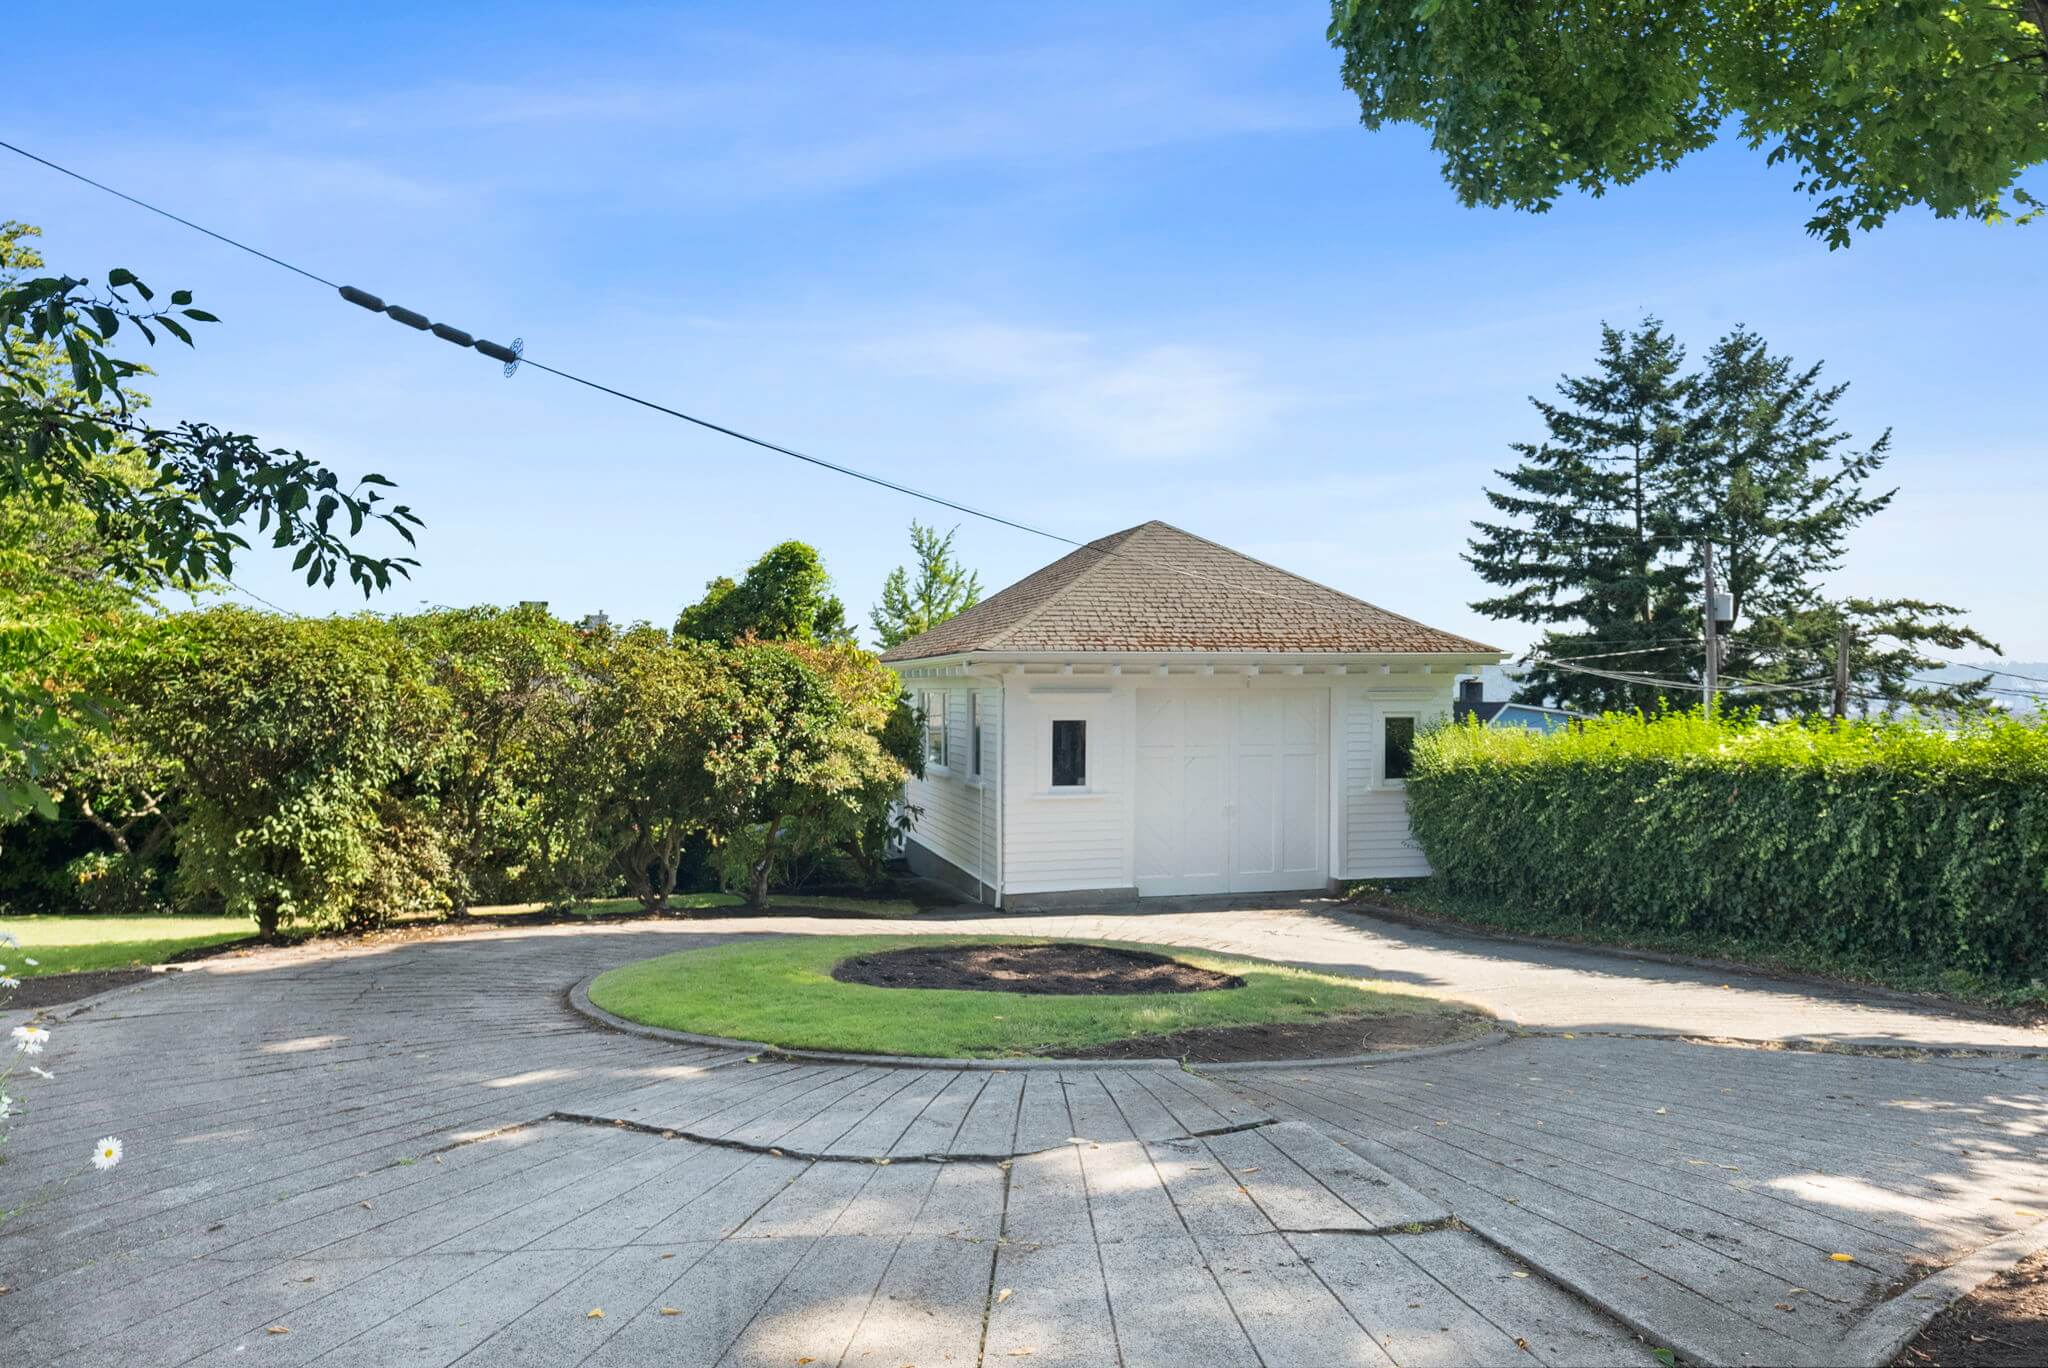 Circular driveway beyond the porte-cochere leads to a detached garage